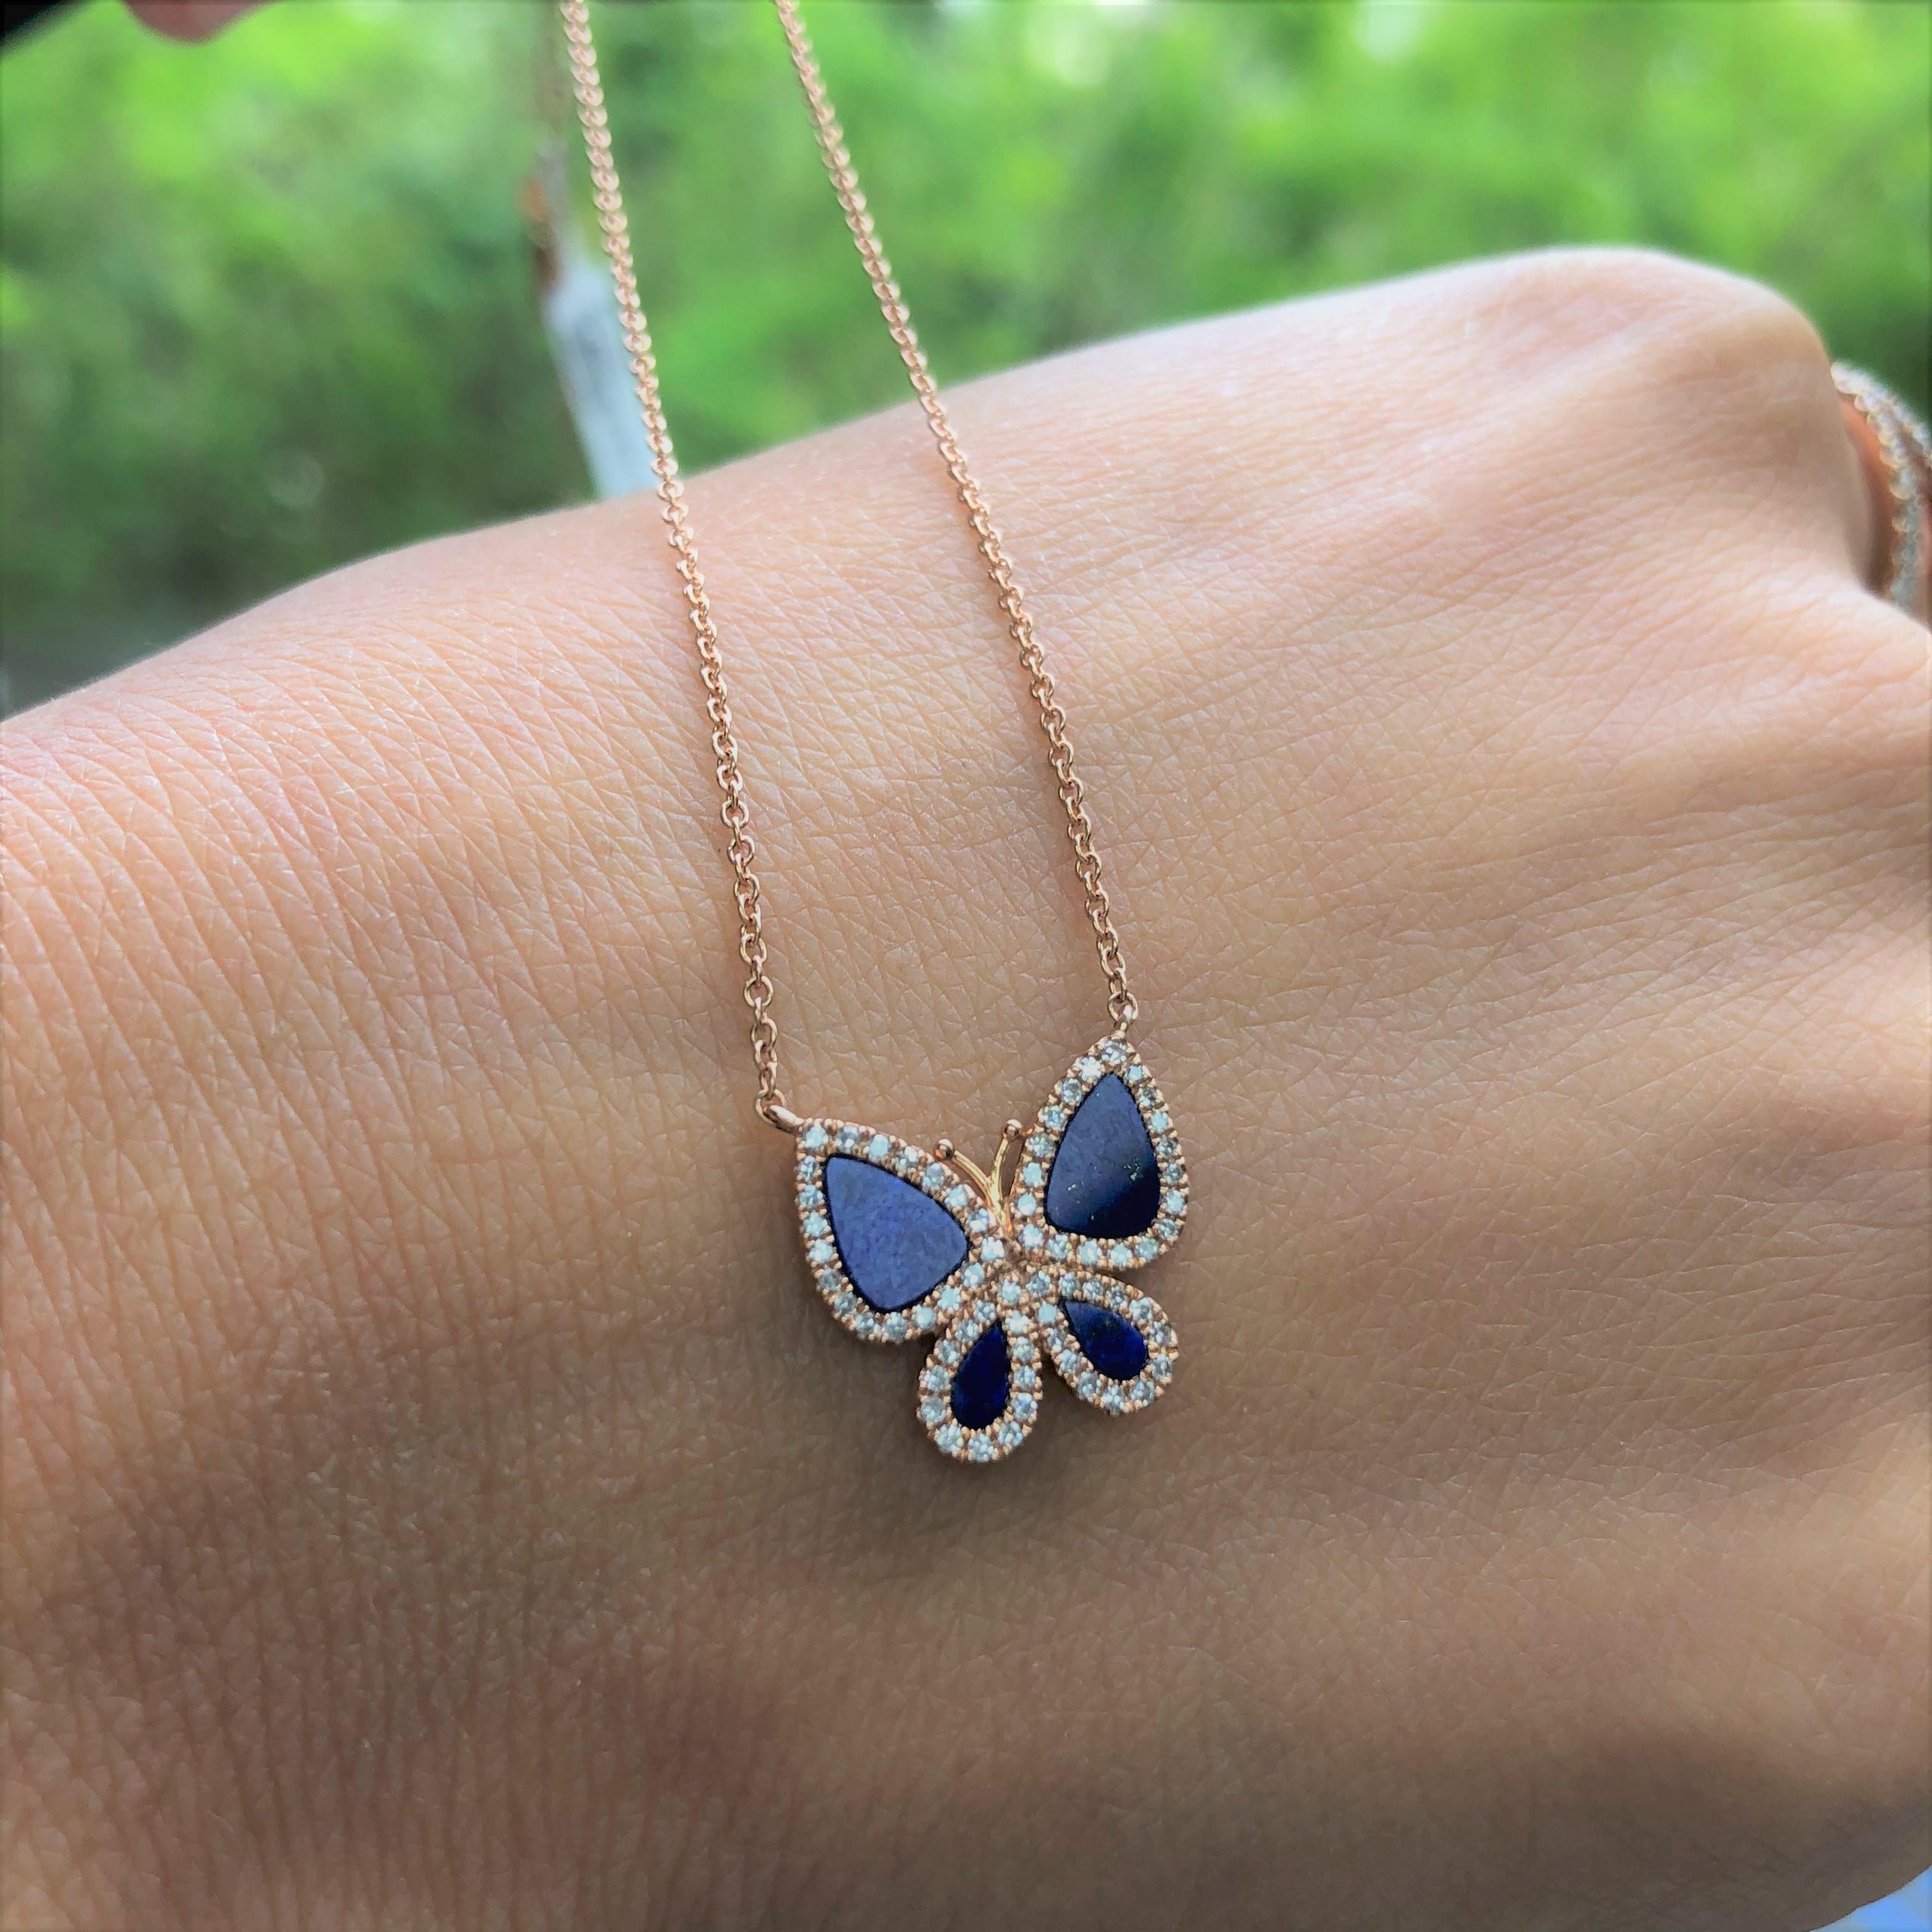 This Beautiful and Summer Loving Butterfly Pendant on and adjustable 16